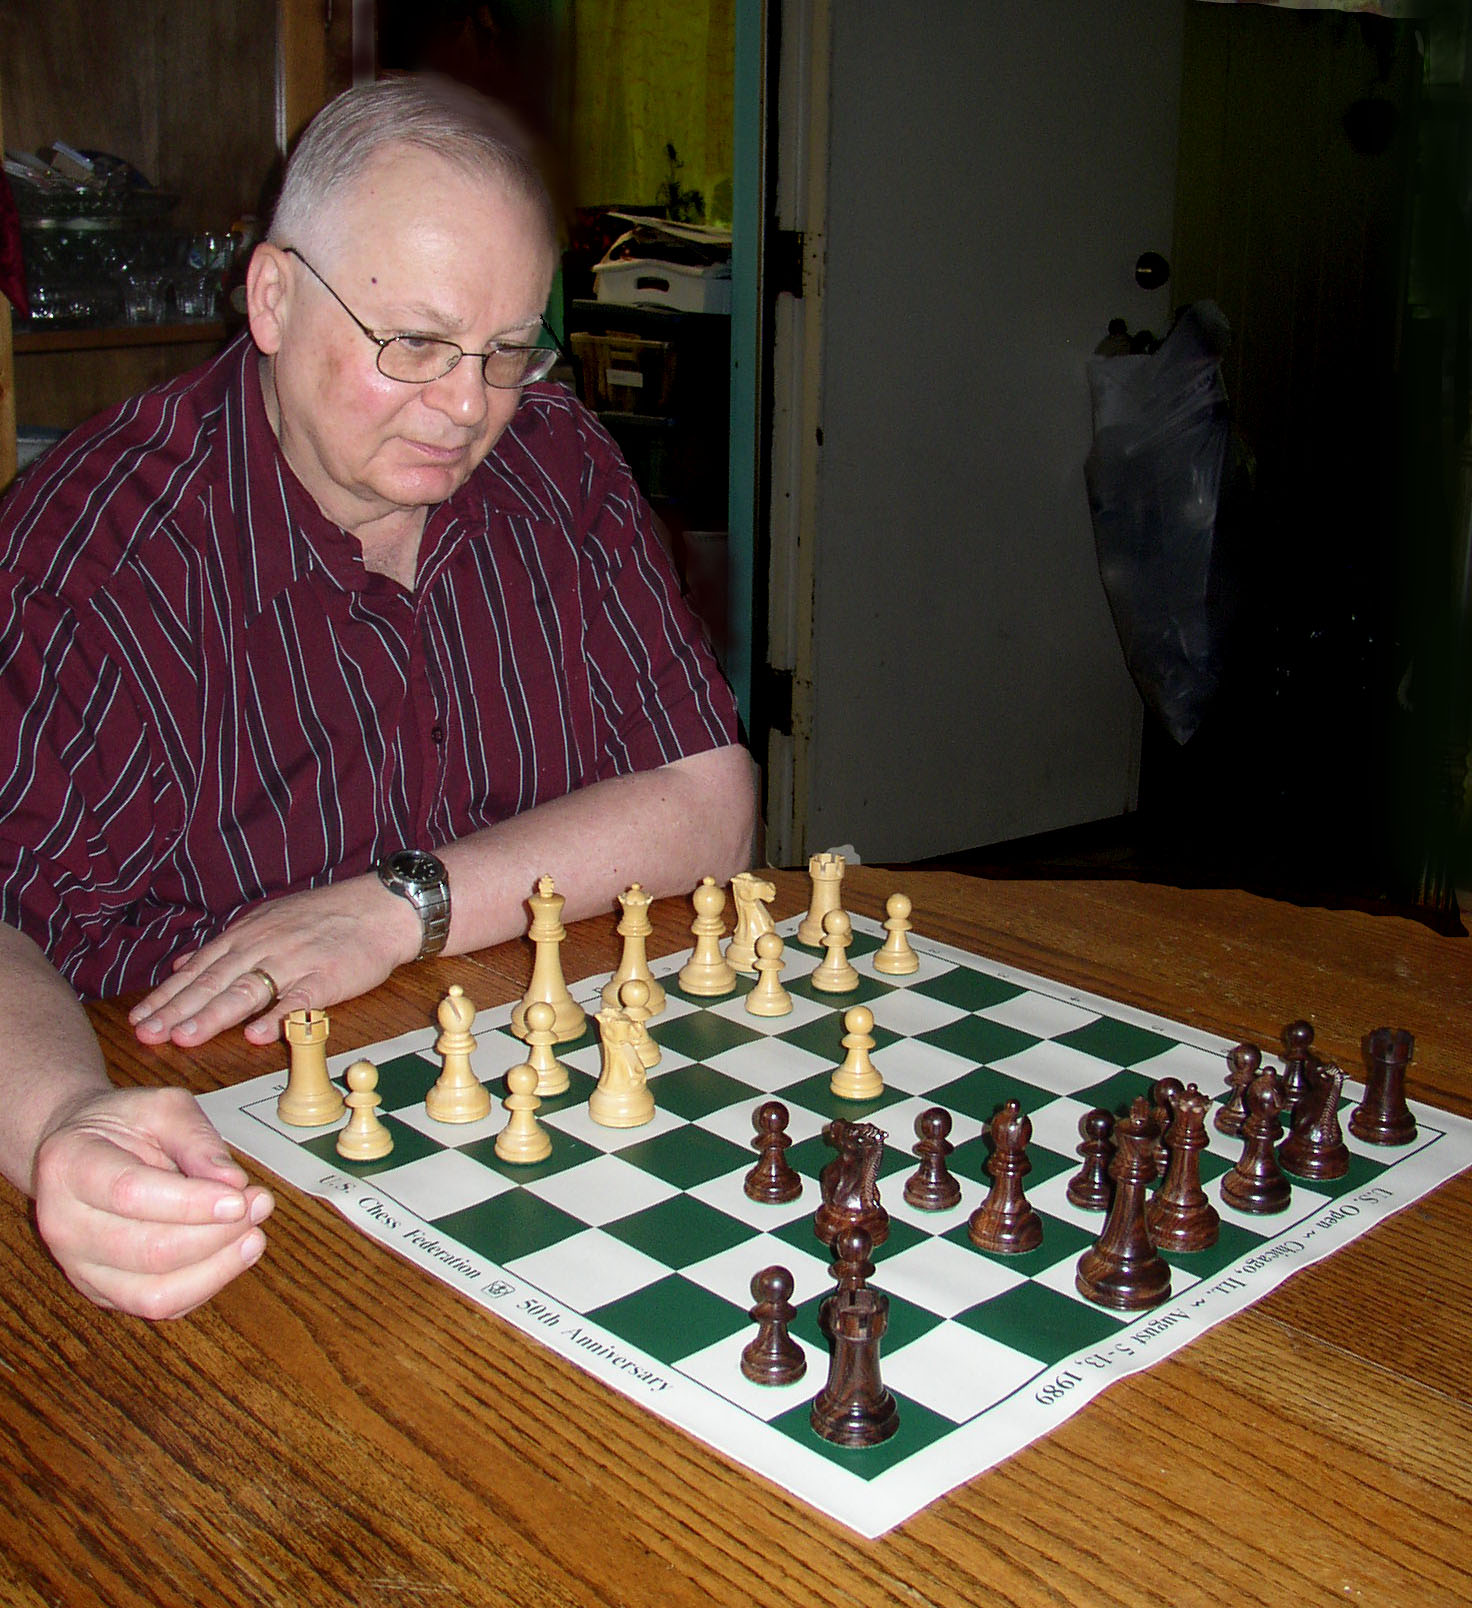 CCLA member Paul D. Shannon photographed at the chess board